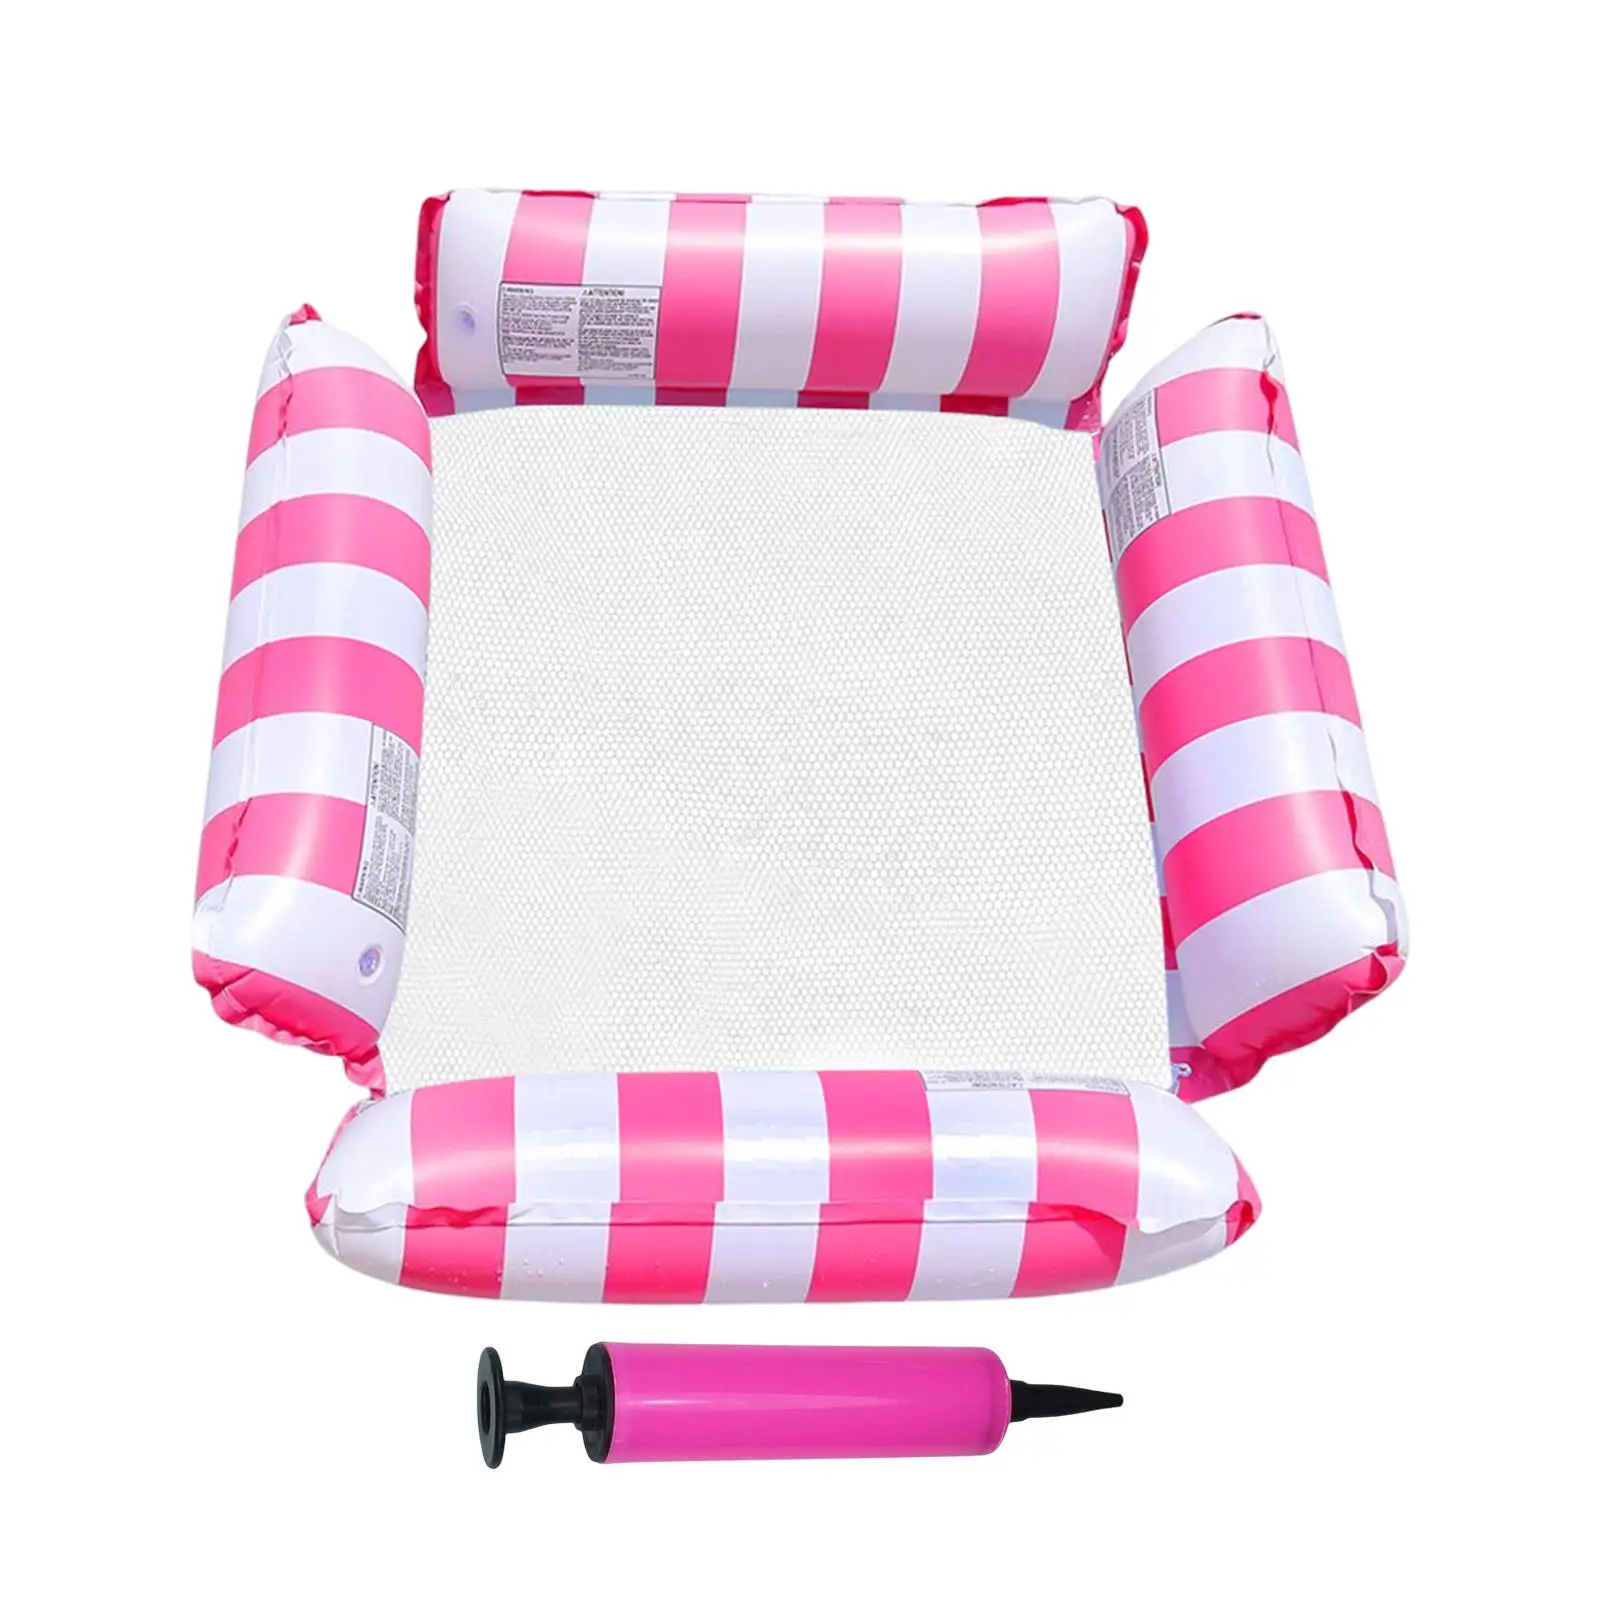 Float Lounge Chair Cushion Water Toy Bed Buoyancy with Air Pump Floating Chair for Party Relaxing Swimming Pool Travel Vocation